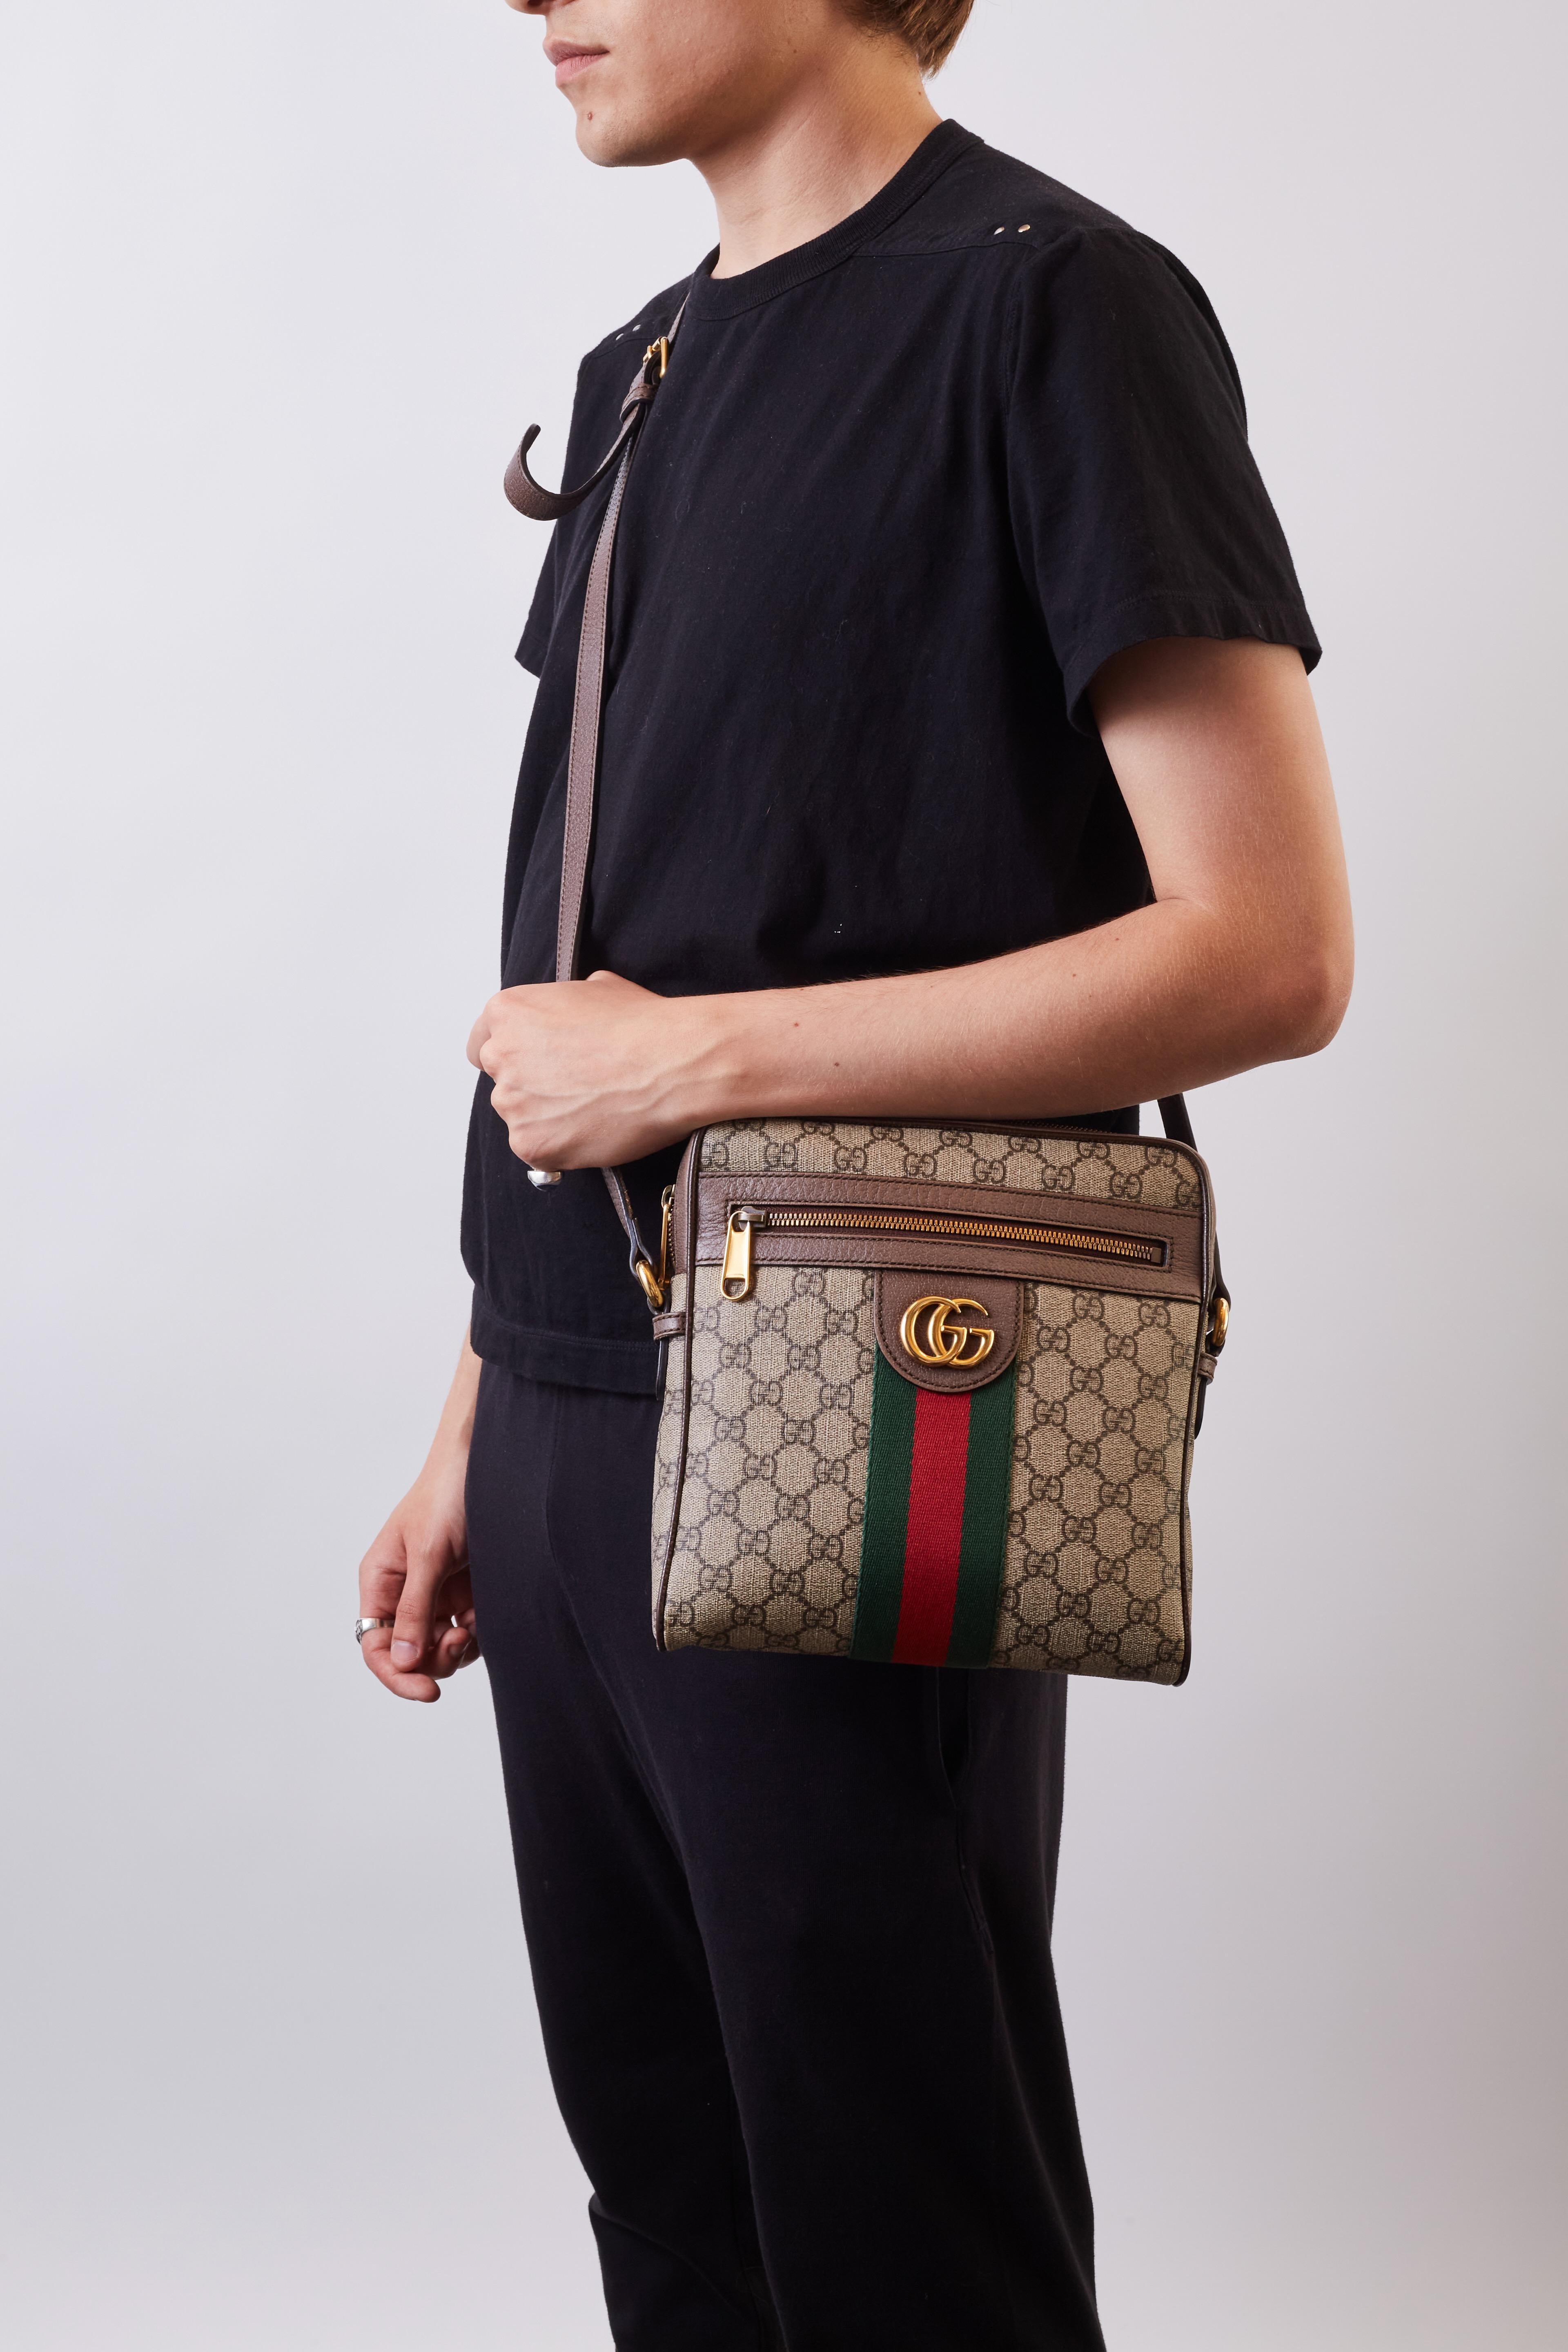 This shoulder bag is constructed of Gucci GG supreme monogram on coated canvas, with brown leather trim and an adjustable shoulder strap. The bag features a front zipper pocket embellished with an aged gold interlocking GG logo, and red and green